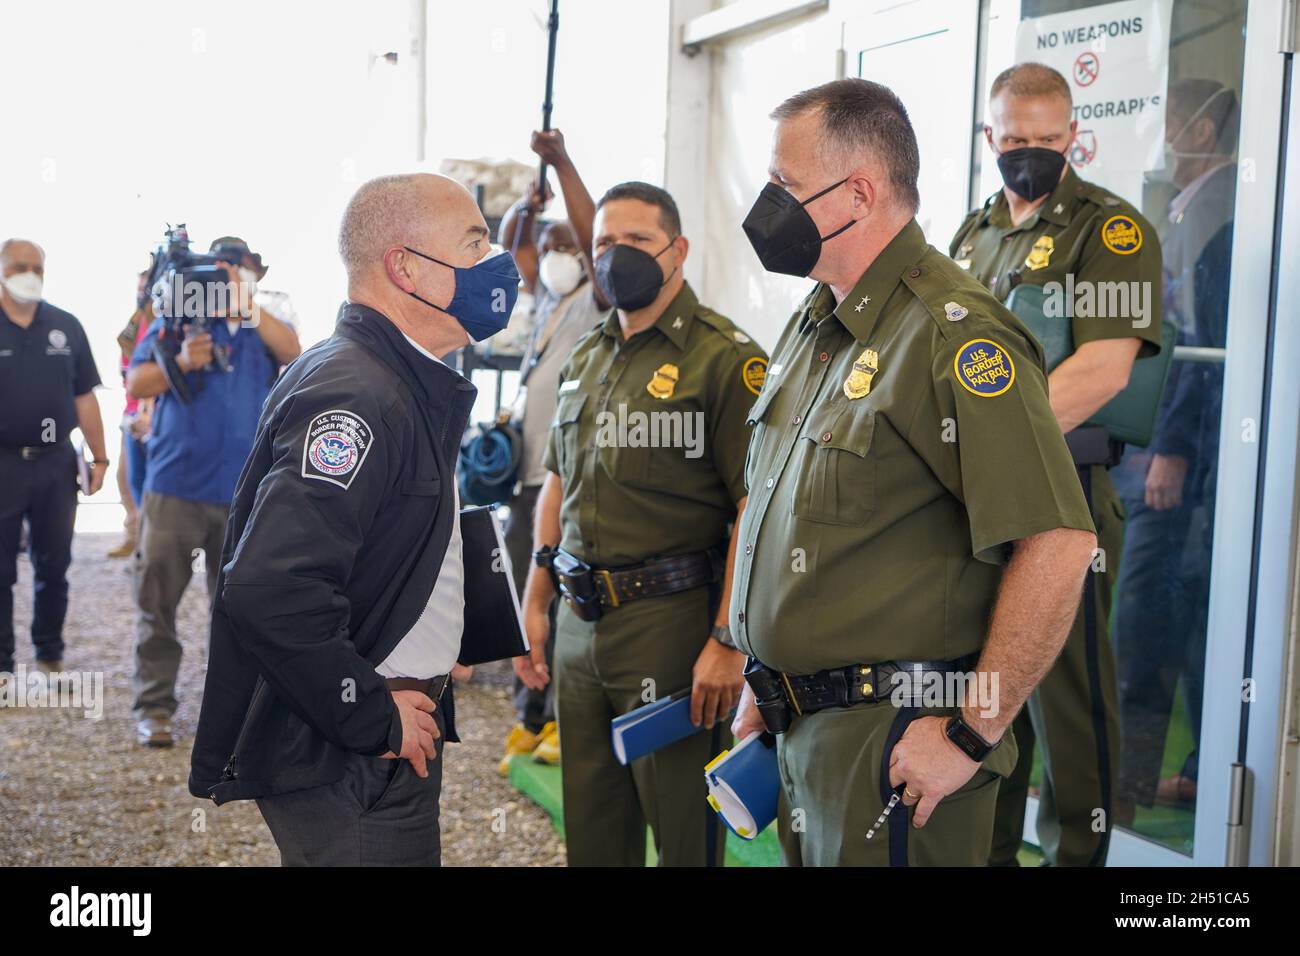 Donna, United States. 07 May, 2021. U.S Homeland Security Secretary Alejandro Mayorkas, left, is greeted by Border Patrol RGV Chief Brian S. Hastings  before touring the the Customs and Border Patrol immigration processing center May 7, 2021 in Donna, Texas.  Credit: Michael Battise/Homeland Security/Alamy Live News Stock Photo